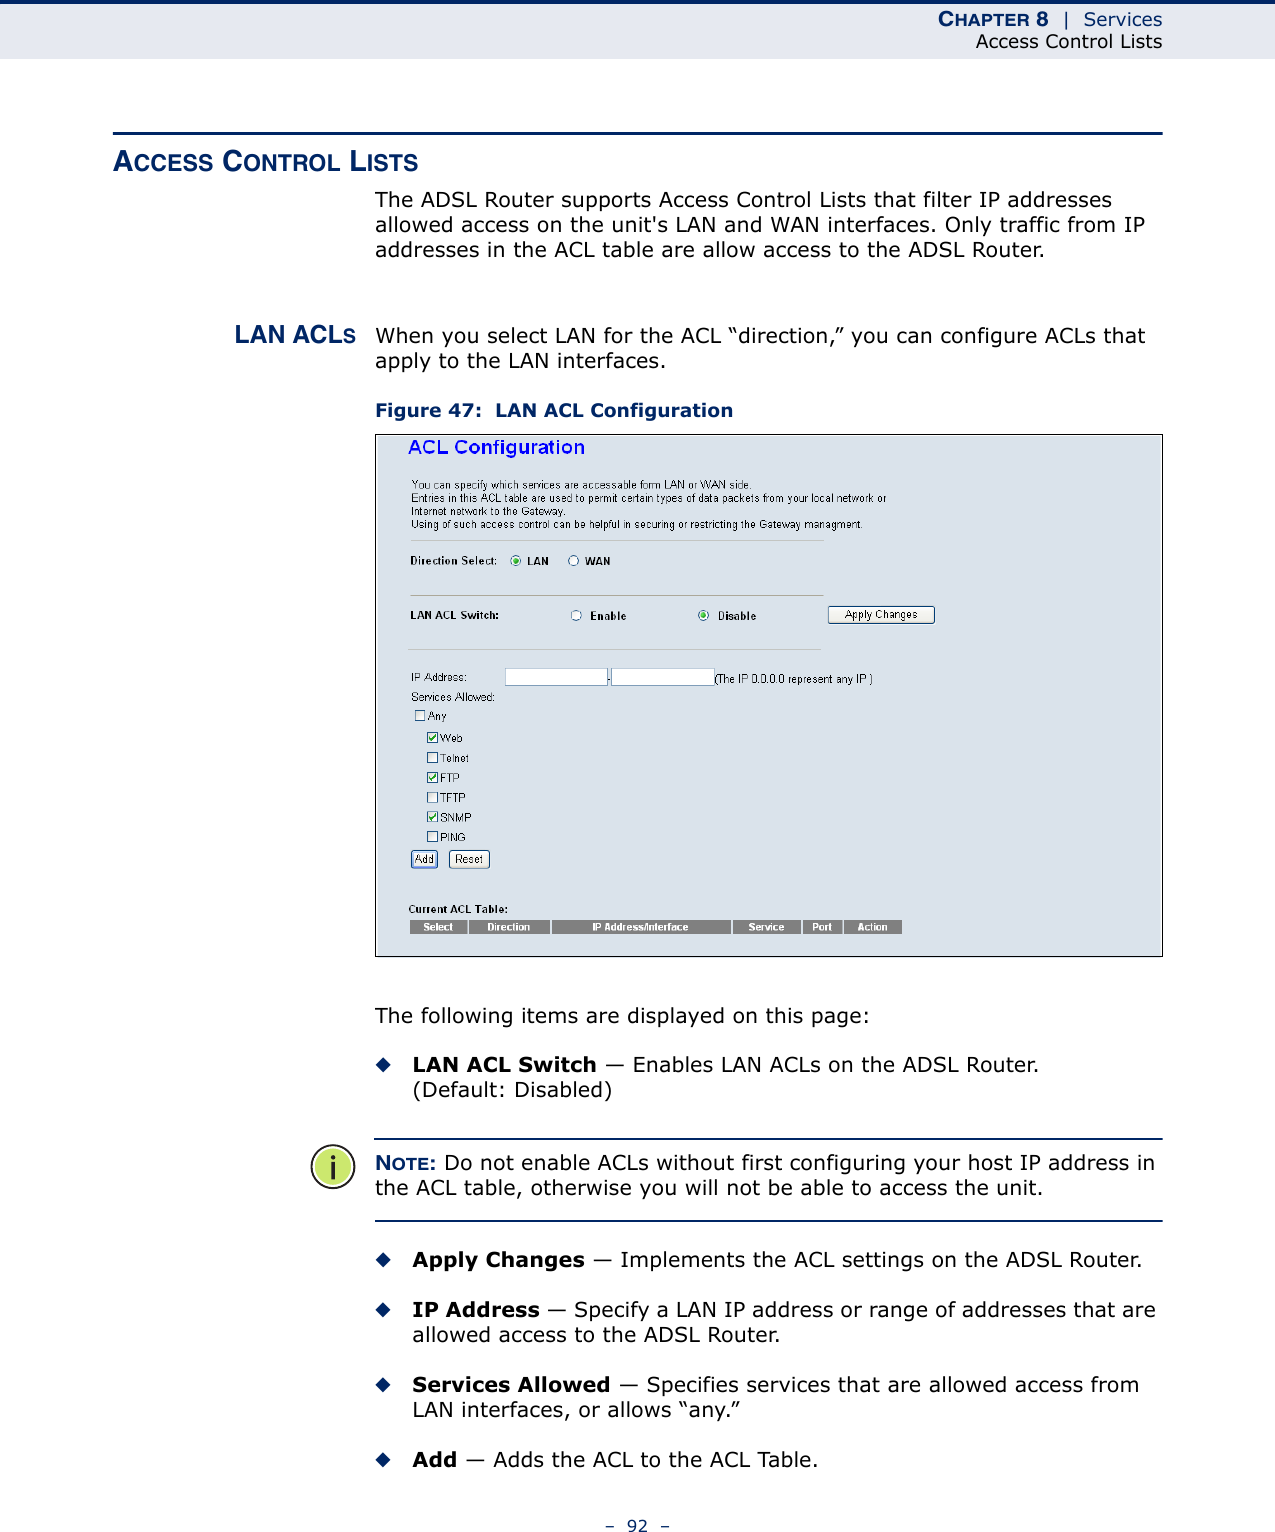 CHAPTER 8  |  ServicesAccess Control Lists–  92  –ACCESS CONTROL LISTSThe ADSL Router supports Access Control Lists that filter IP addresses allowed access on the unit&apos;s LAN and WAN interfaces. Only traffic from IP addresses in the ACL table are allow access to the ADSL Router.LAN ACLSWhen you select LAN for the ACL “direction,” you can configure ACLs that apply to the LAN interfaces.Figure 47:  LAN ACL ConfigurationThe following items are displayed on this page:◆LAN ACL Switch — Enables LAN ACLs on the ADSL Router. (Default: Disabled)NOTE: Do not enable ACLs without first configuring your host IP address in the ACL table, otherwise you will not be able to access the unit.◆Apply Changes — Implements the ACL settings on the ADSL Router.◆IP Address — Specify a LAN IP address or range of addresses that are allowed access to the ADSL Router. ◆Services Allowed — Specifies services that are allowed access from LAN interfaces, or allows “any.”◆Add — Adds the ACL to the ACL Table.